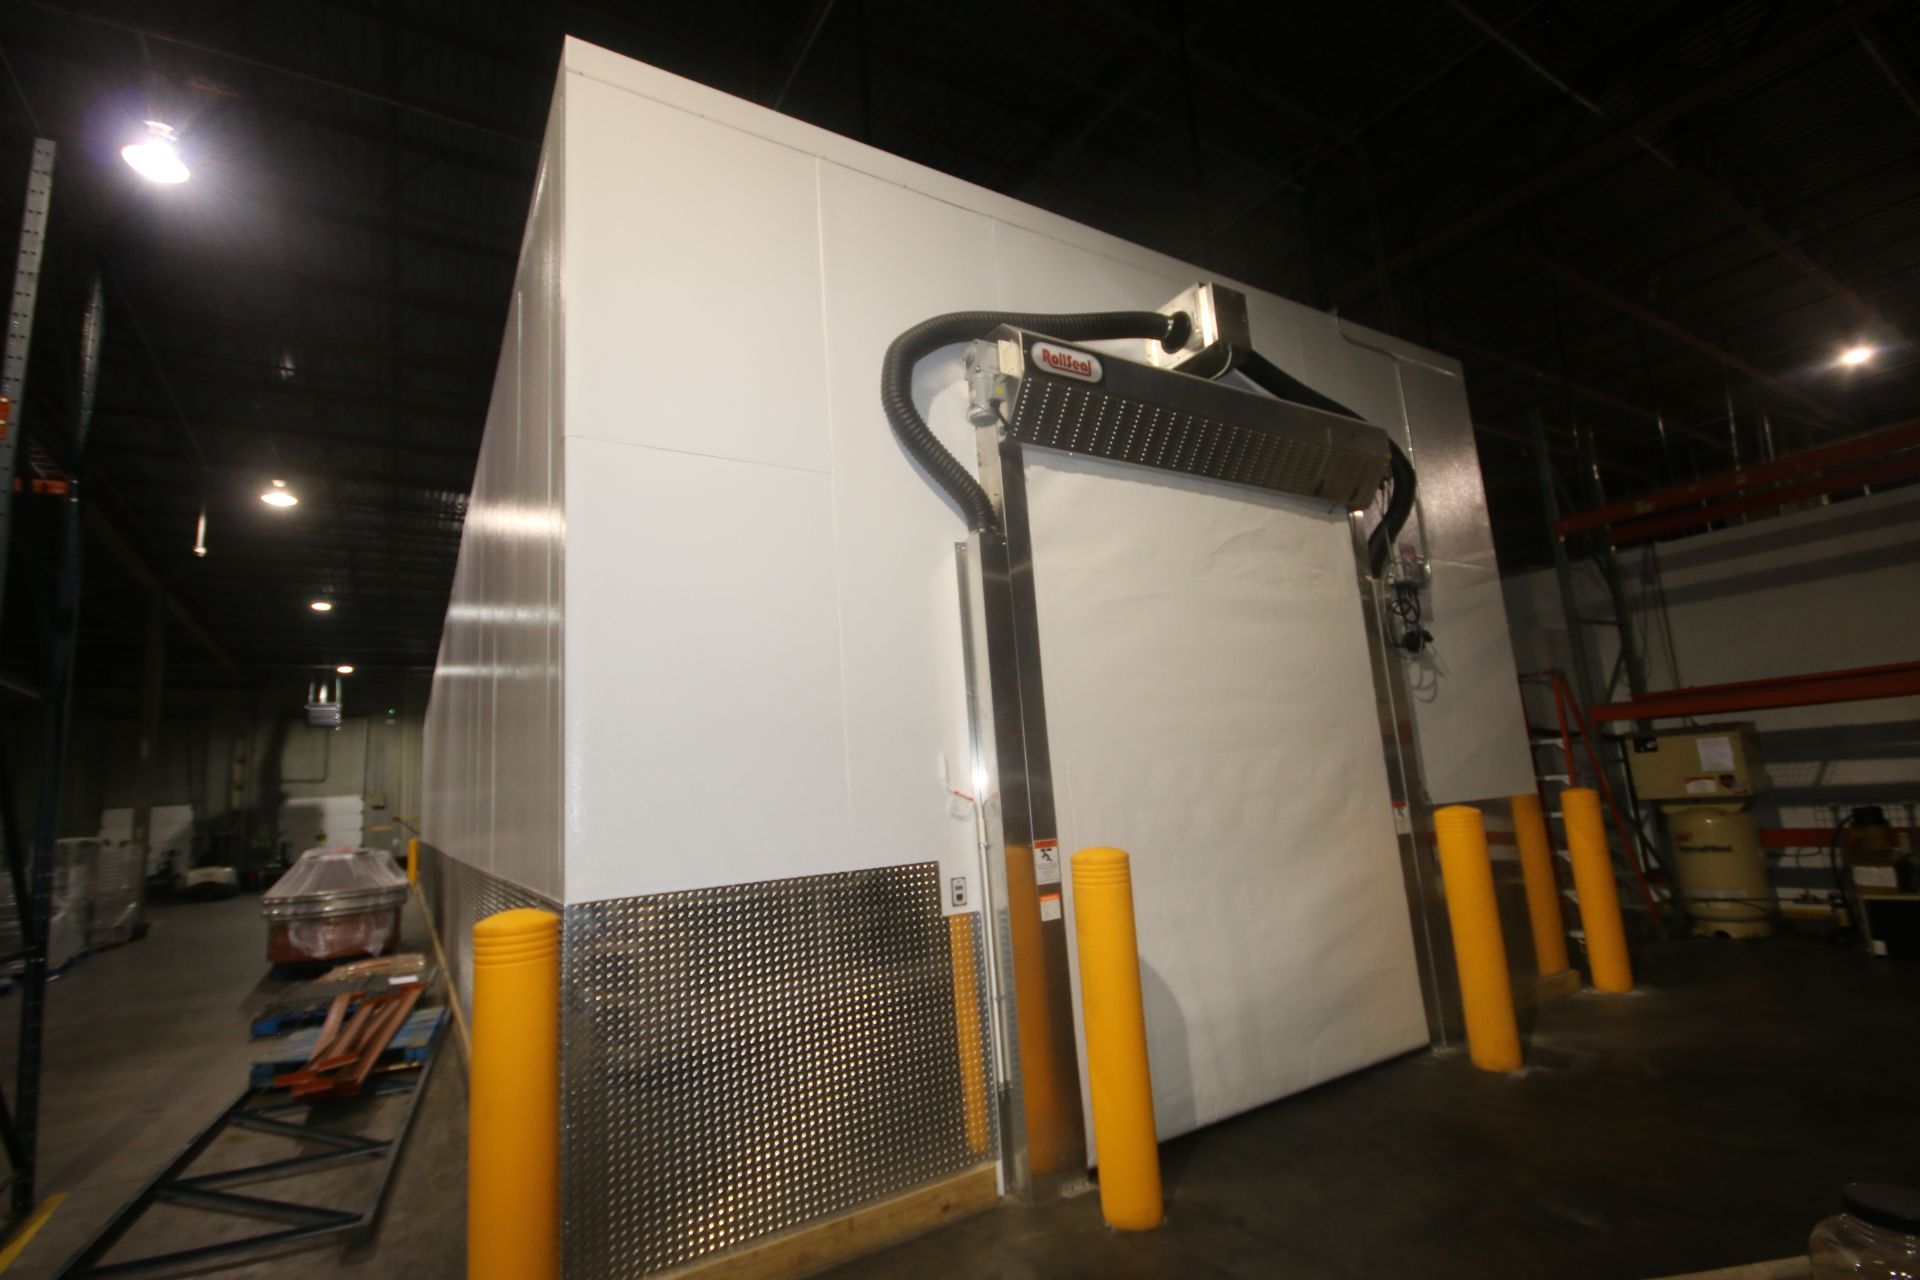 2018 RollSeal Air Tight Drive-Thru Modular Room, Overall Dims.: Aprox. 88' L x 20' W x 190" Tall, - Image 17 of 24